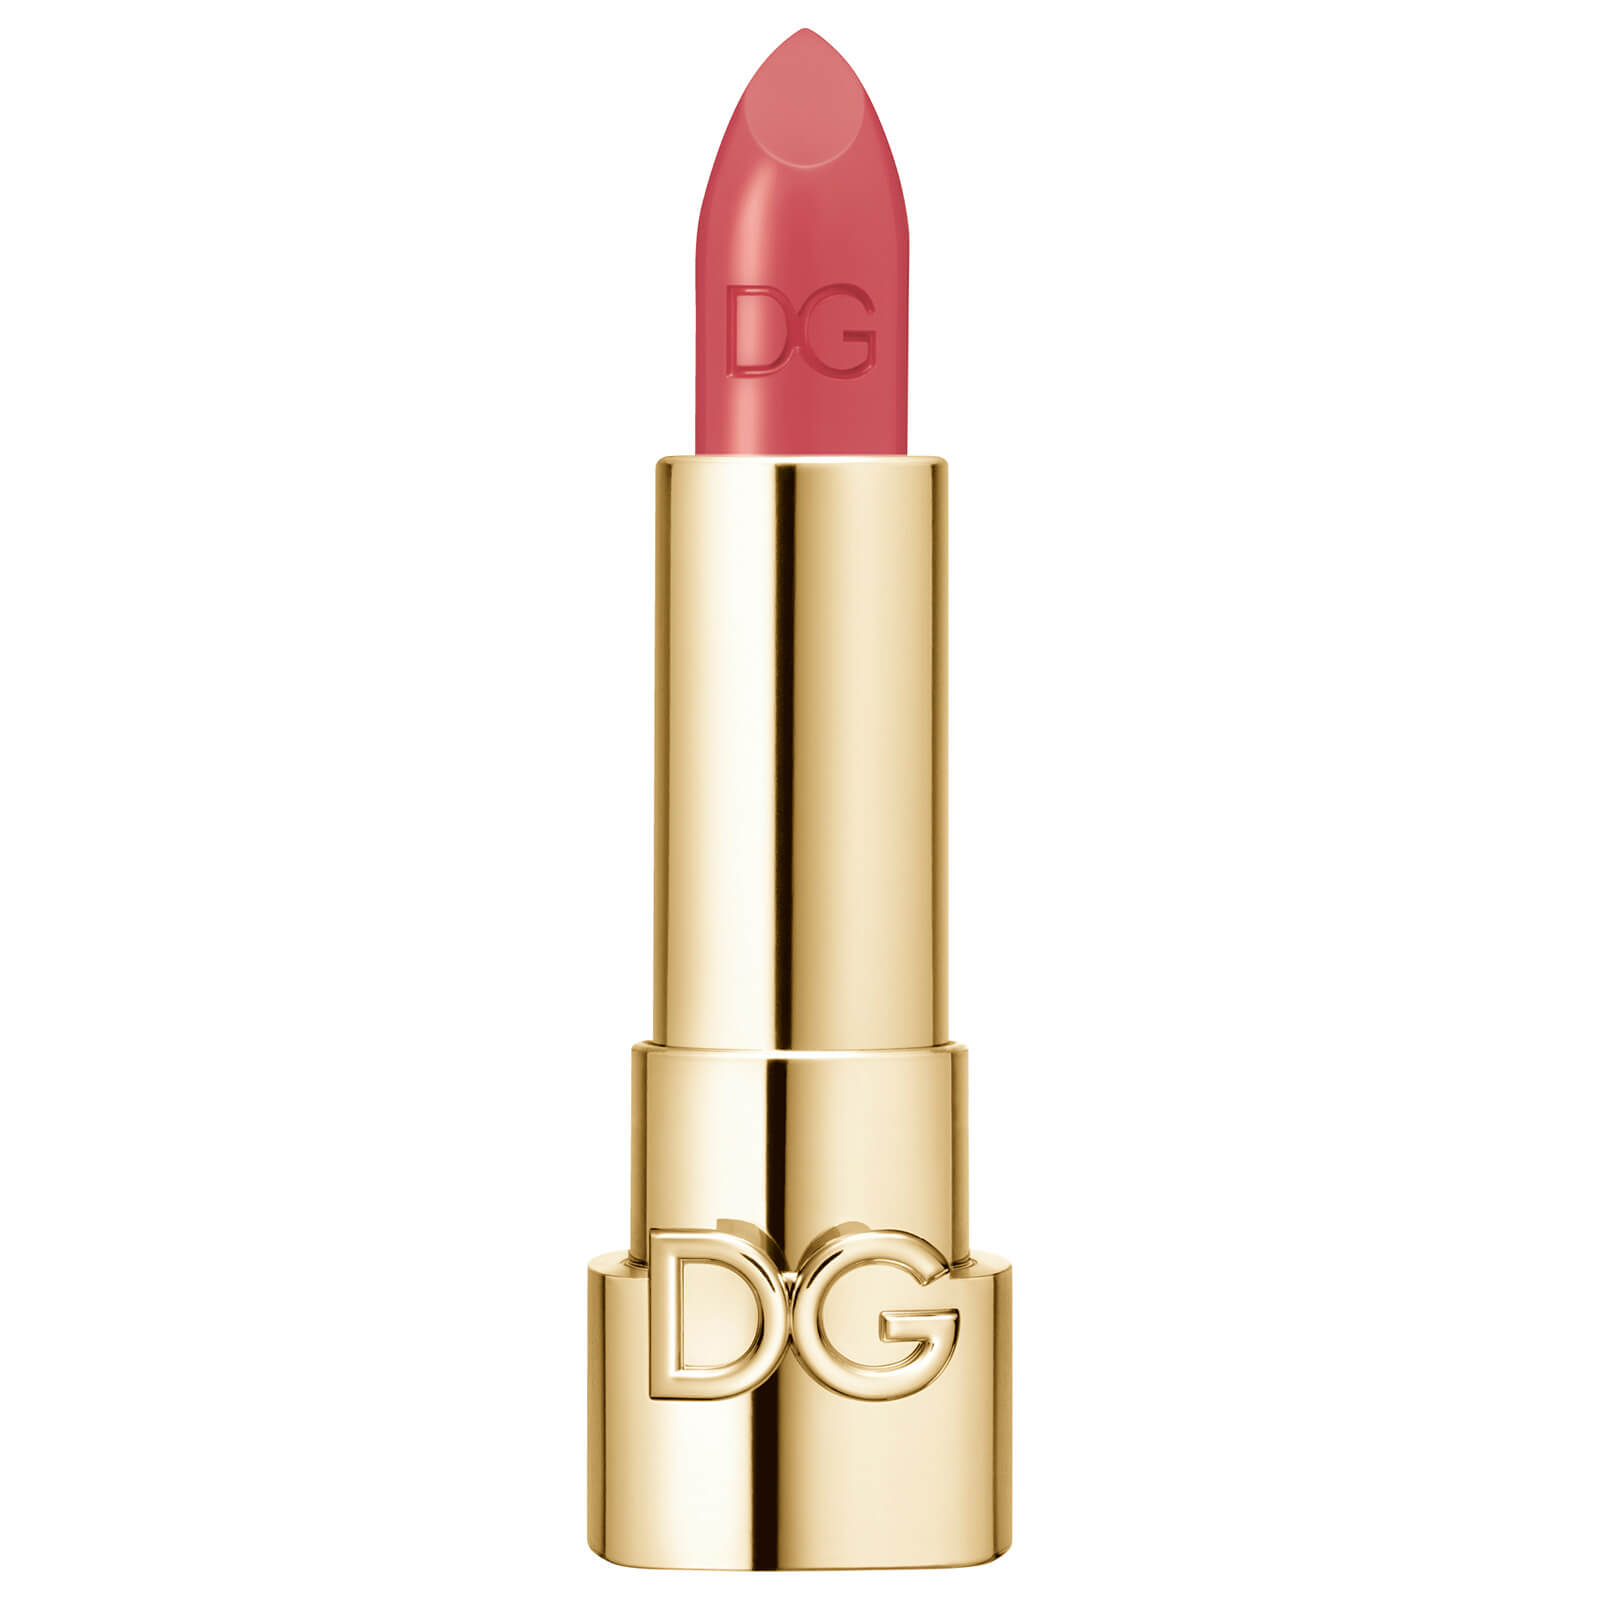 Dolce&Gabbana The Only One Lipstick 1.7g (No Cap) (Various Shades) - 240 Sweet Mamma